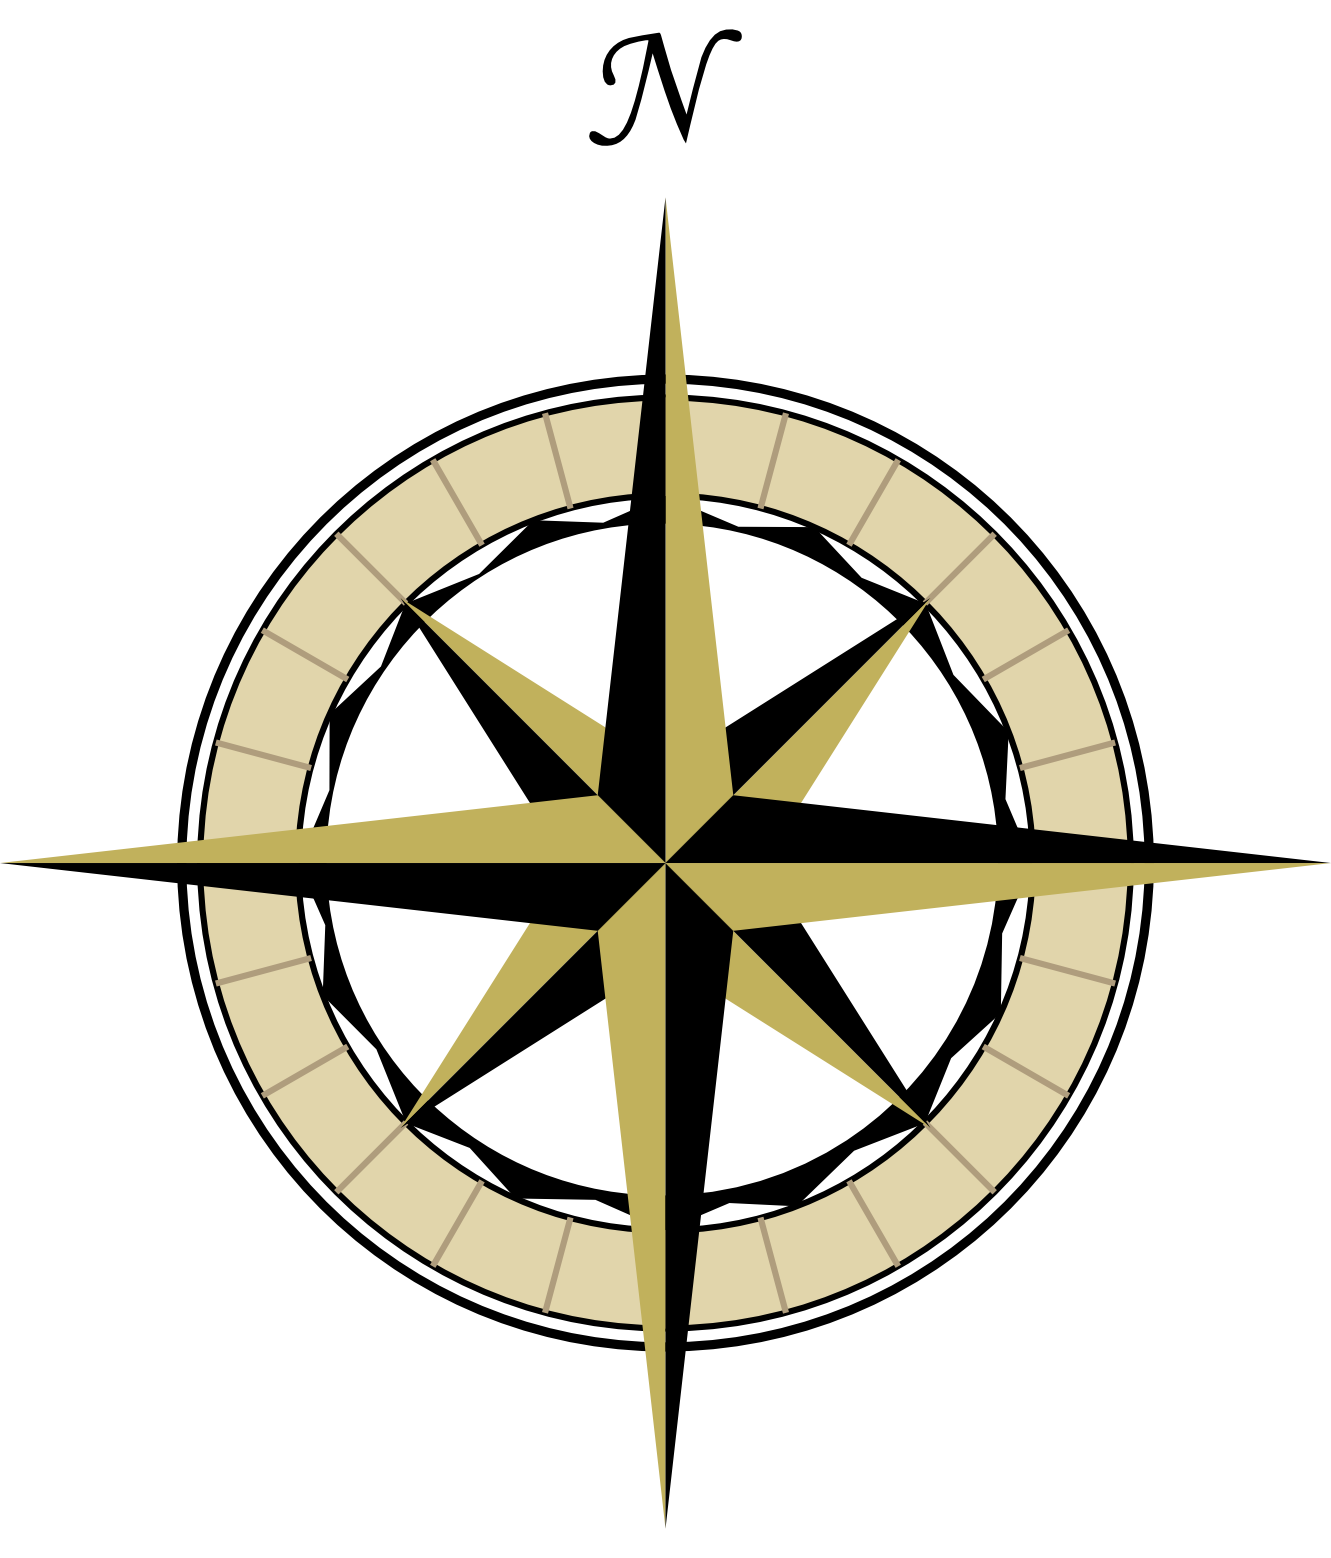 24 Fancy Compass Rose Free Cliparts That You Can Download To You